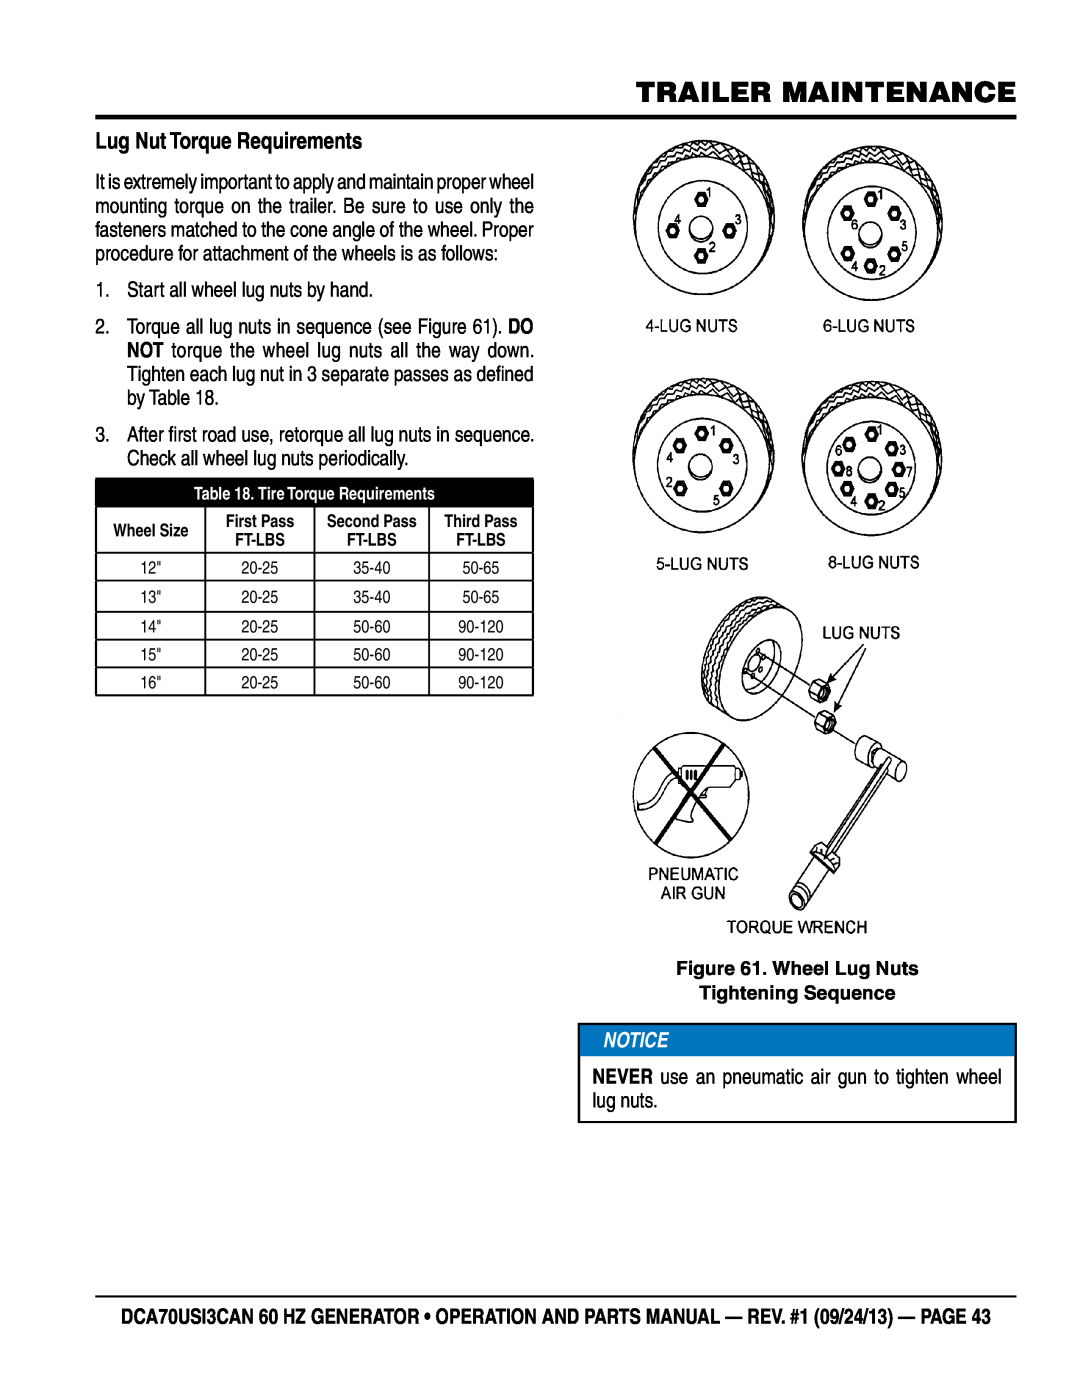 Multiquip DCA70US13CAN Lug Nut Torque Requirements, Trailer Maintenance, Wheel Lug Nuts Tightening Sequence, First Pass 